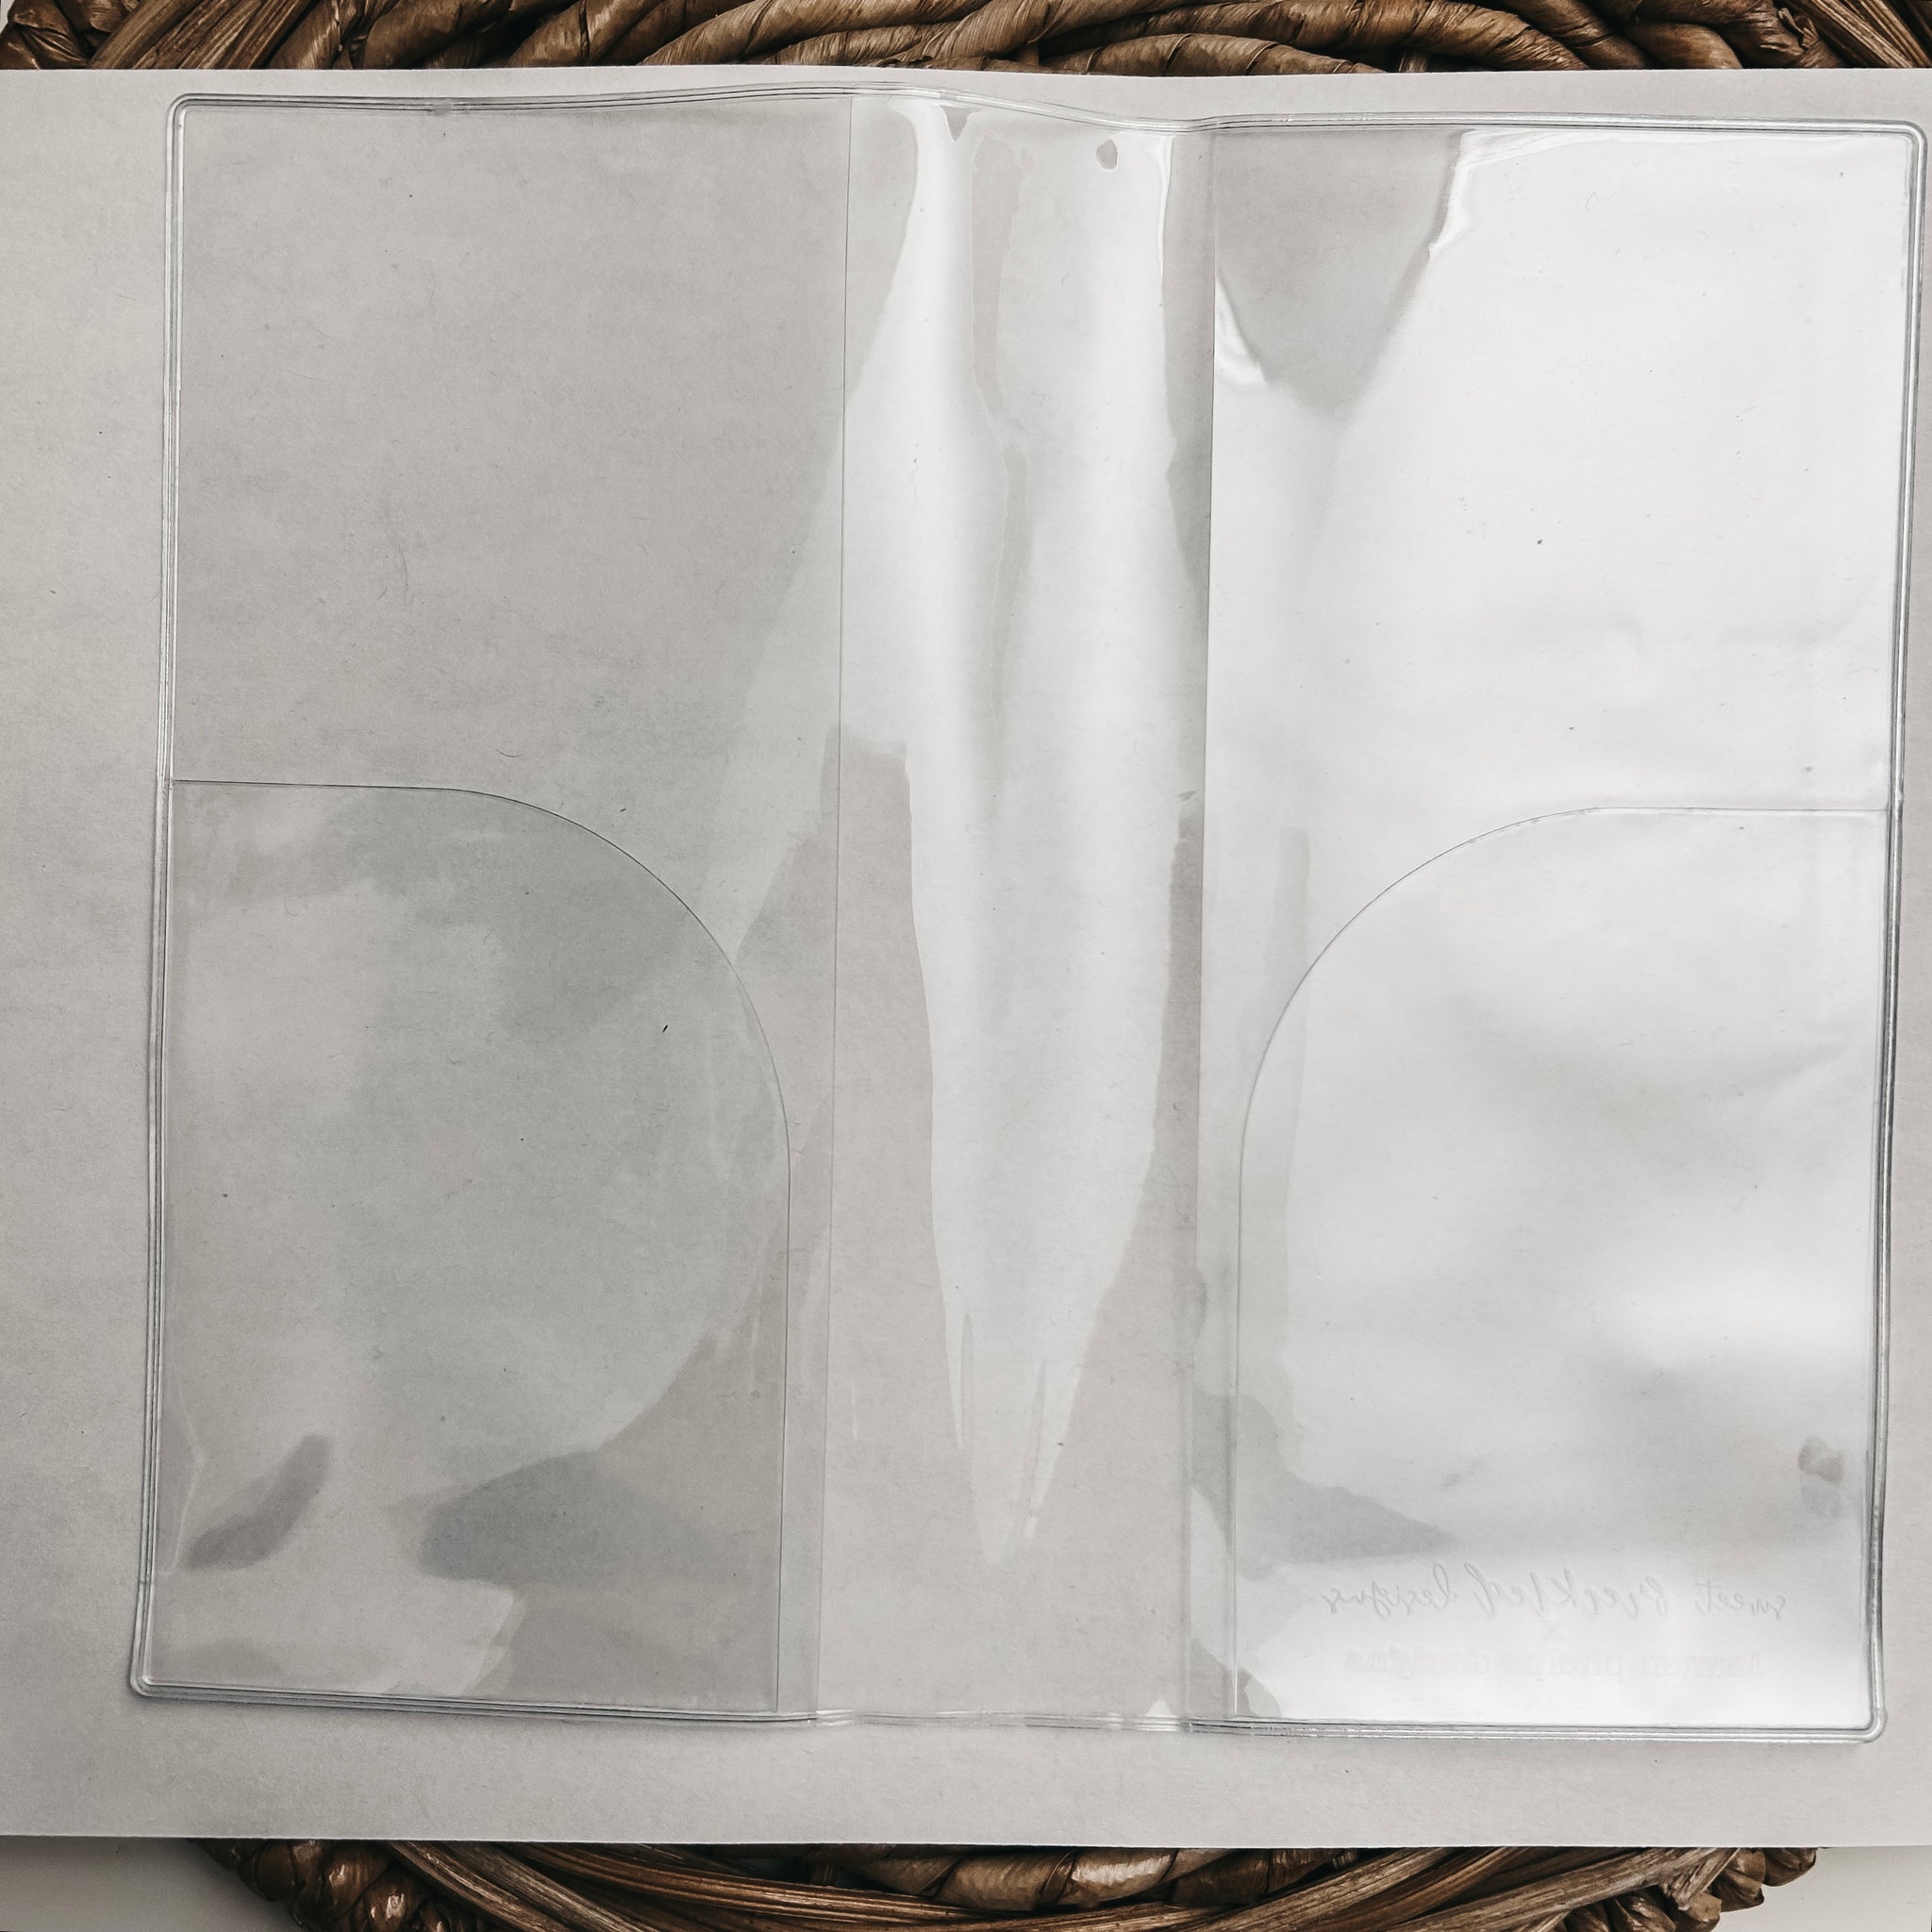 "SFD x LPD" Vinyl Clear Covers for OG Weekly Diary Planners (3 Grades Available!)